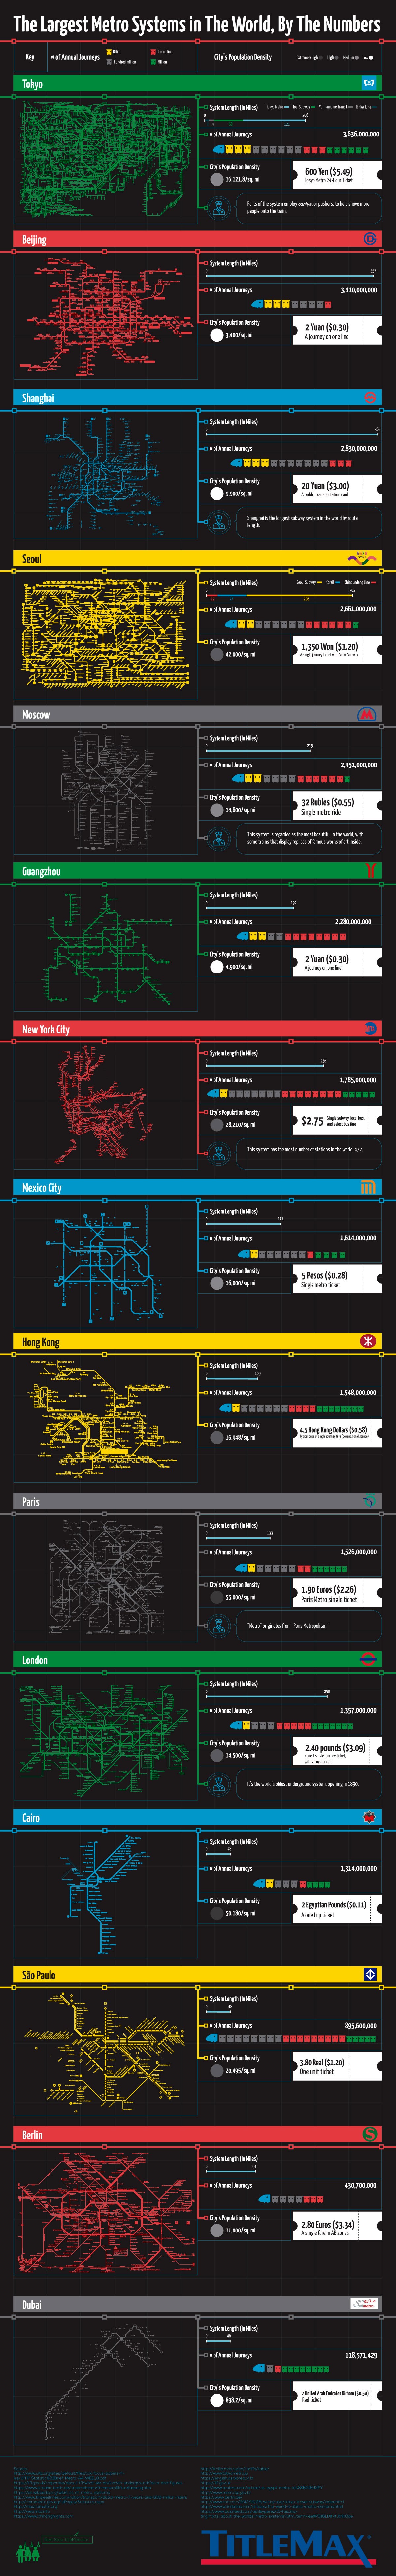 The Largest Metro Systems in the World, By the Numbers #infographic